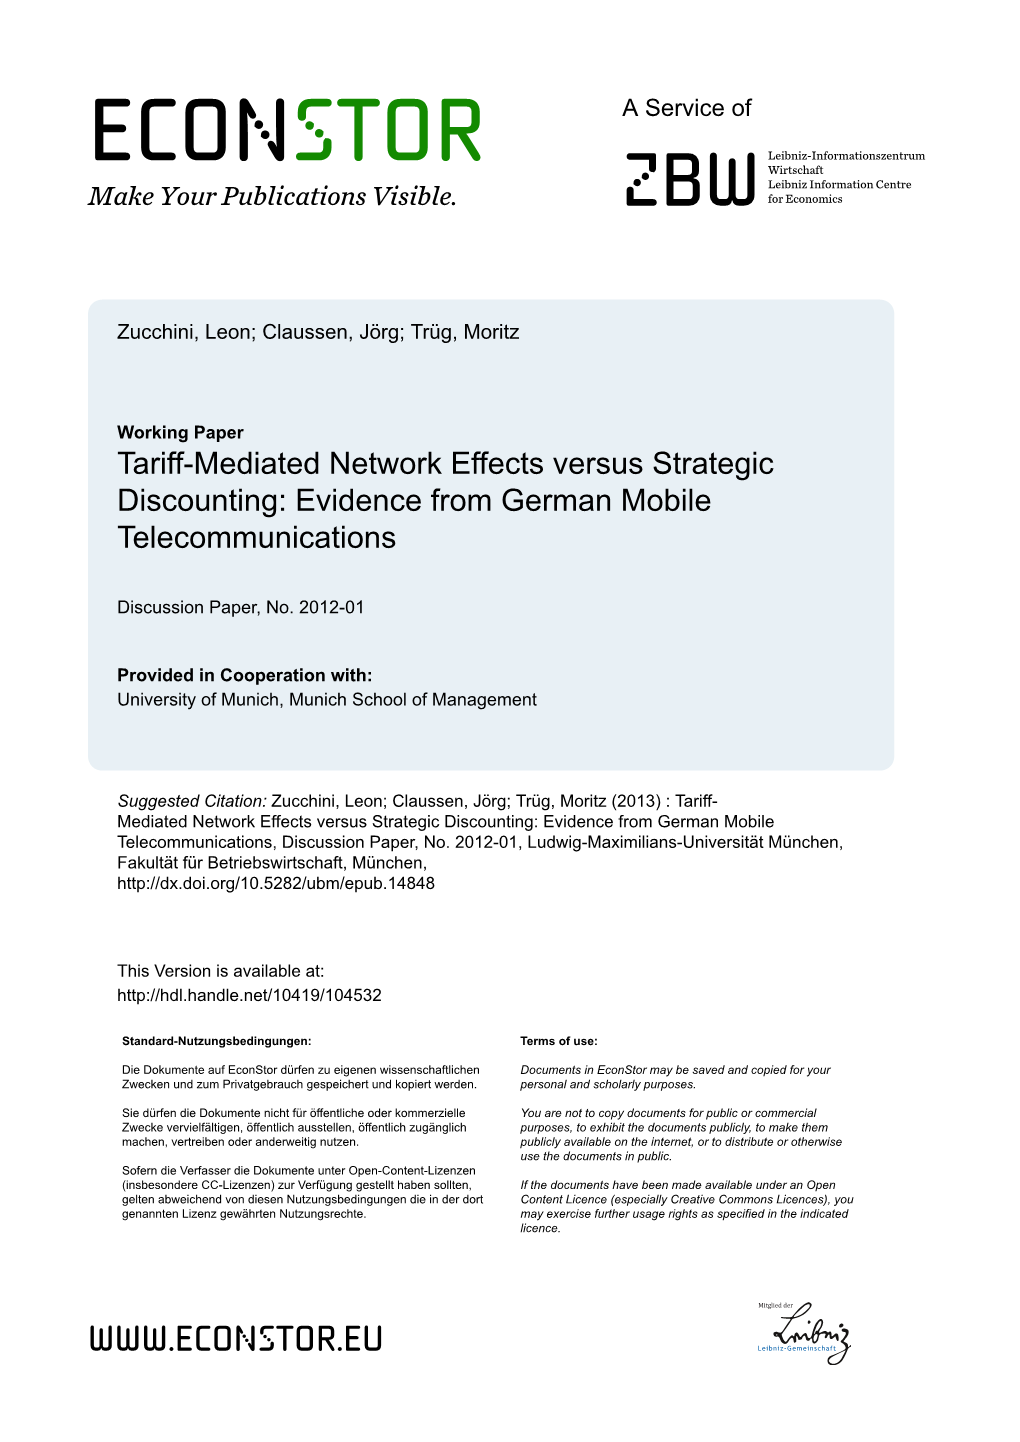 Tariff-Mediated Network Effects Versus Strategic Discounting: Evidence from German Mobile Telecommunications